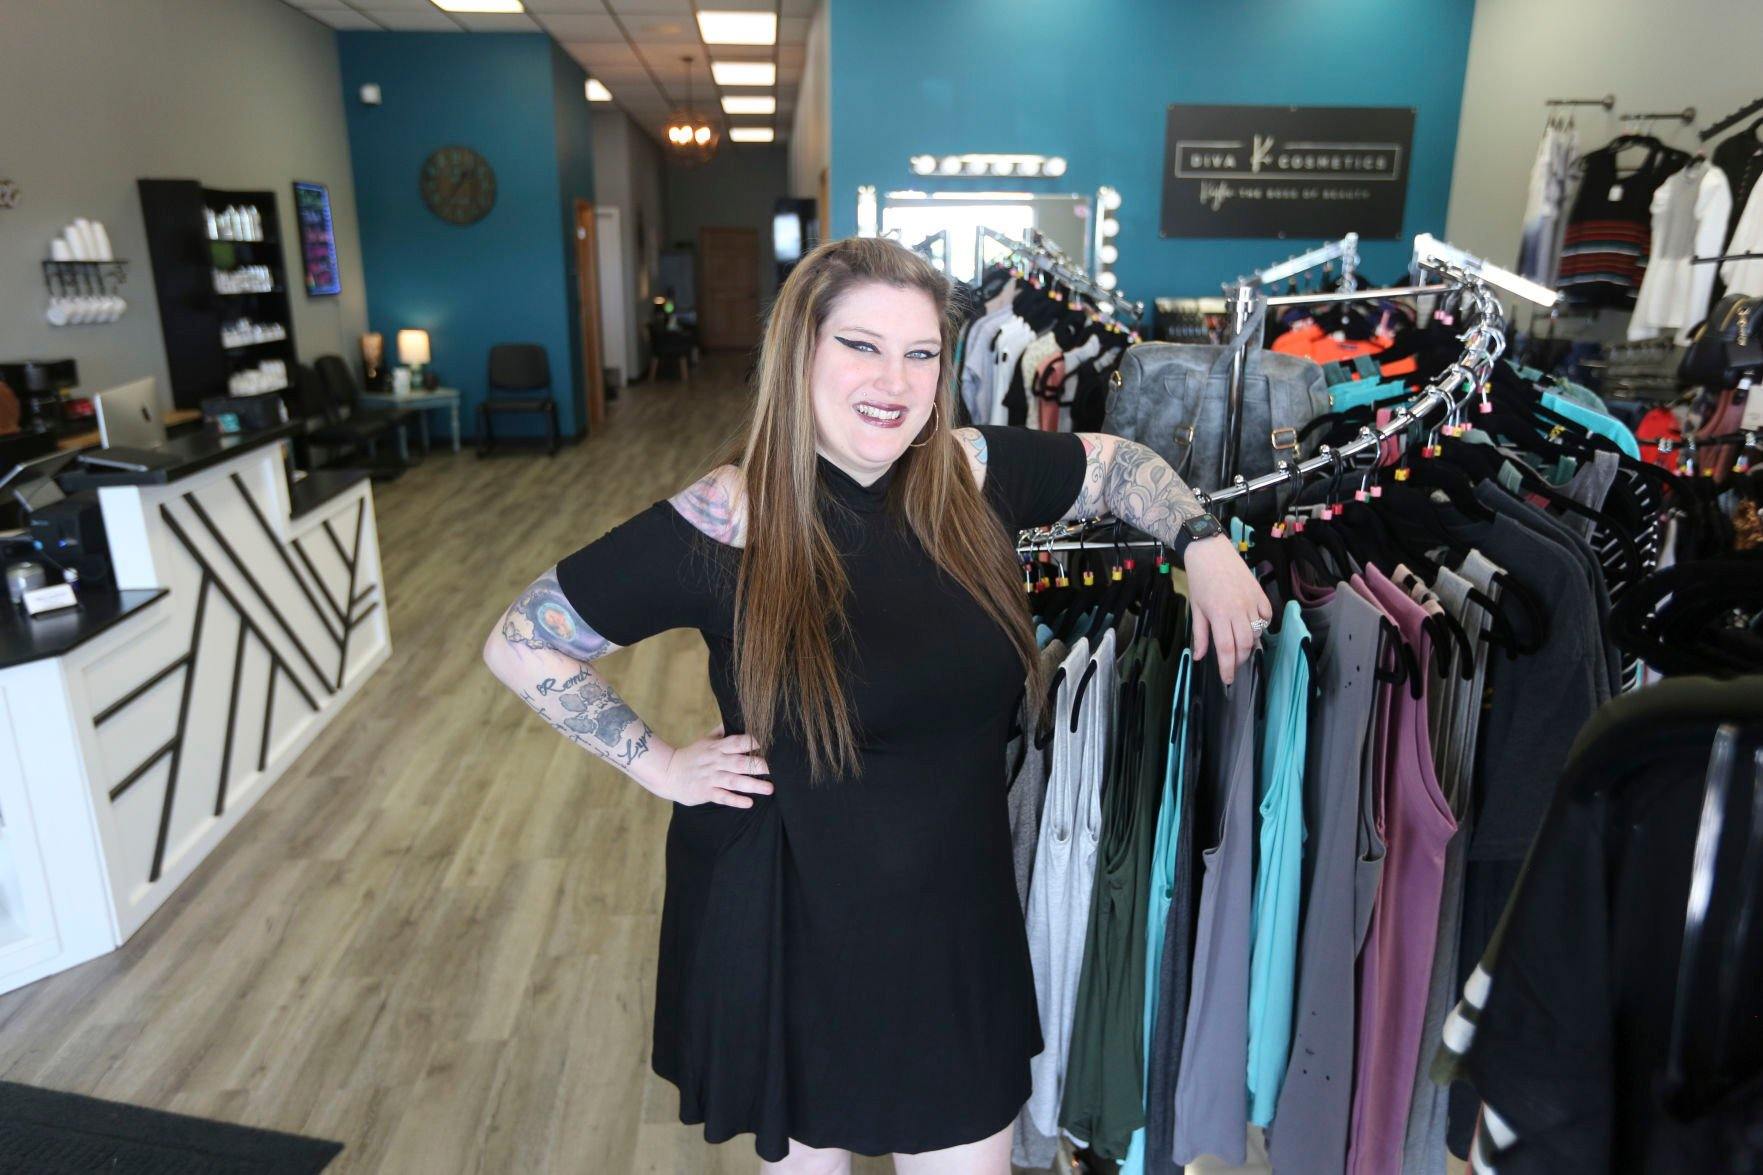 Kaylee Webb, owner of A New You Spa & Boutique, poses in her business at 3337 Hillcrest Road. In the new location, she was able to expand the boutique side of her business, and she will now be launching her own line of hair care products and perfume.    PHOTO CREDIT: Dave Kettering